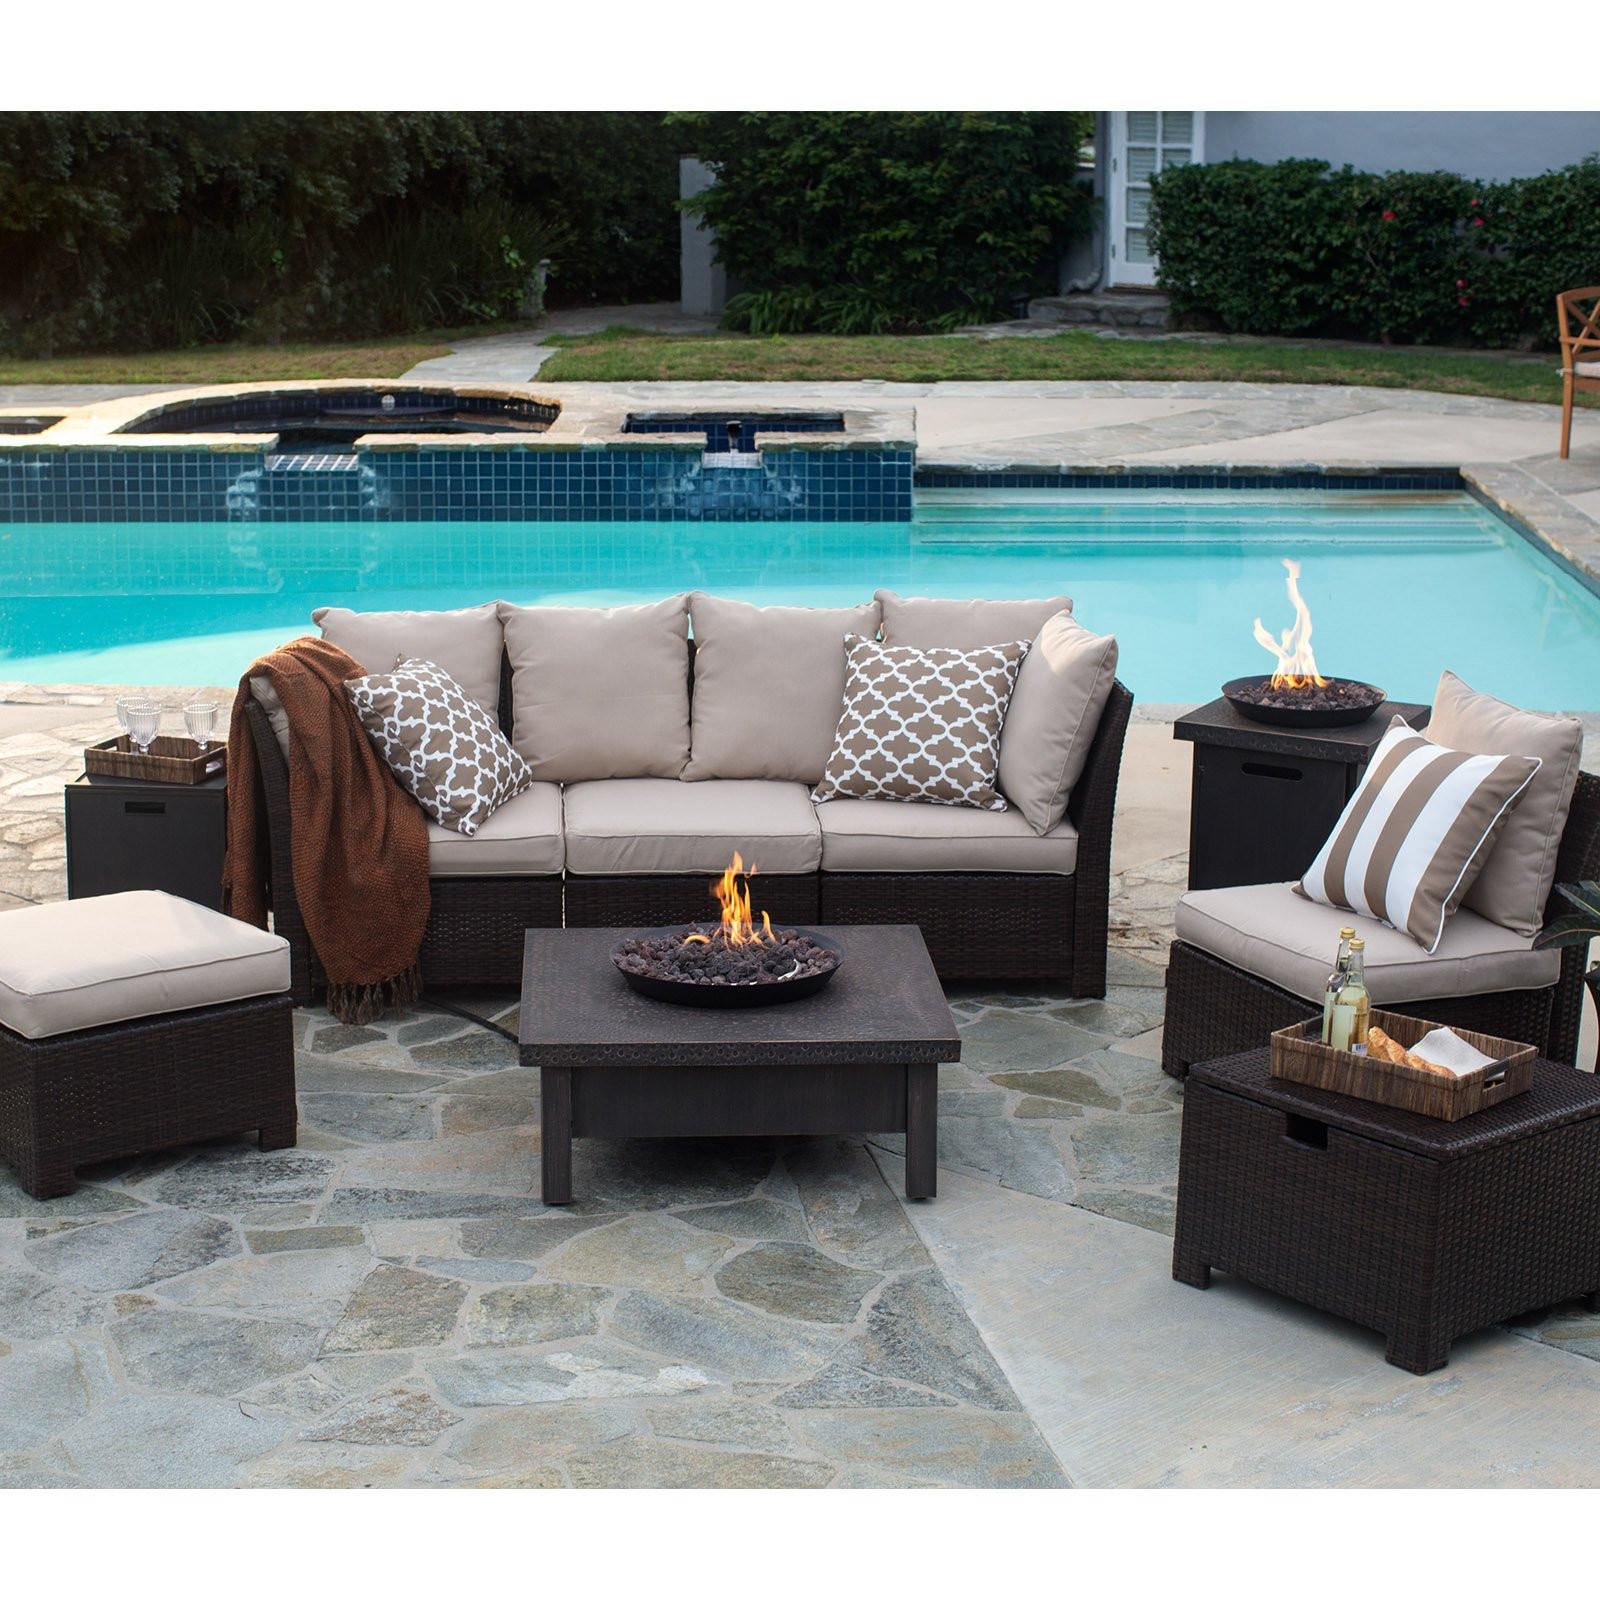 Patio Sets With Fire Pit
 Coral Coast South Isle Dark Brown Sectional Set with